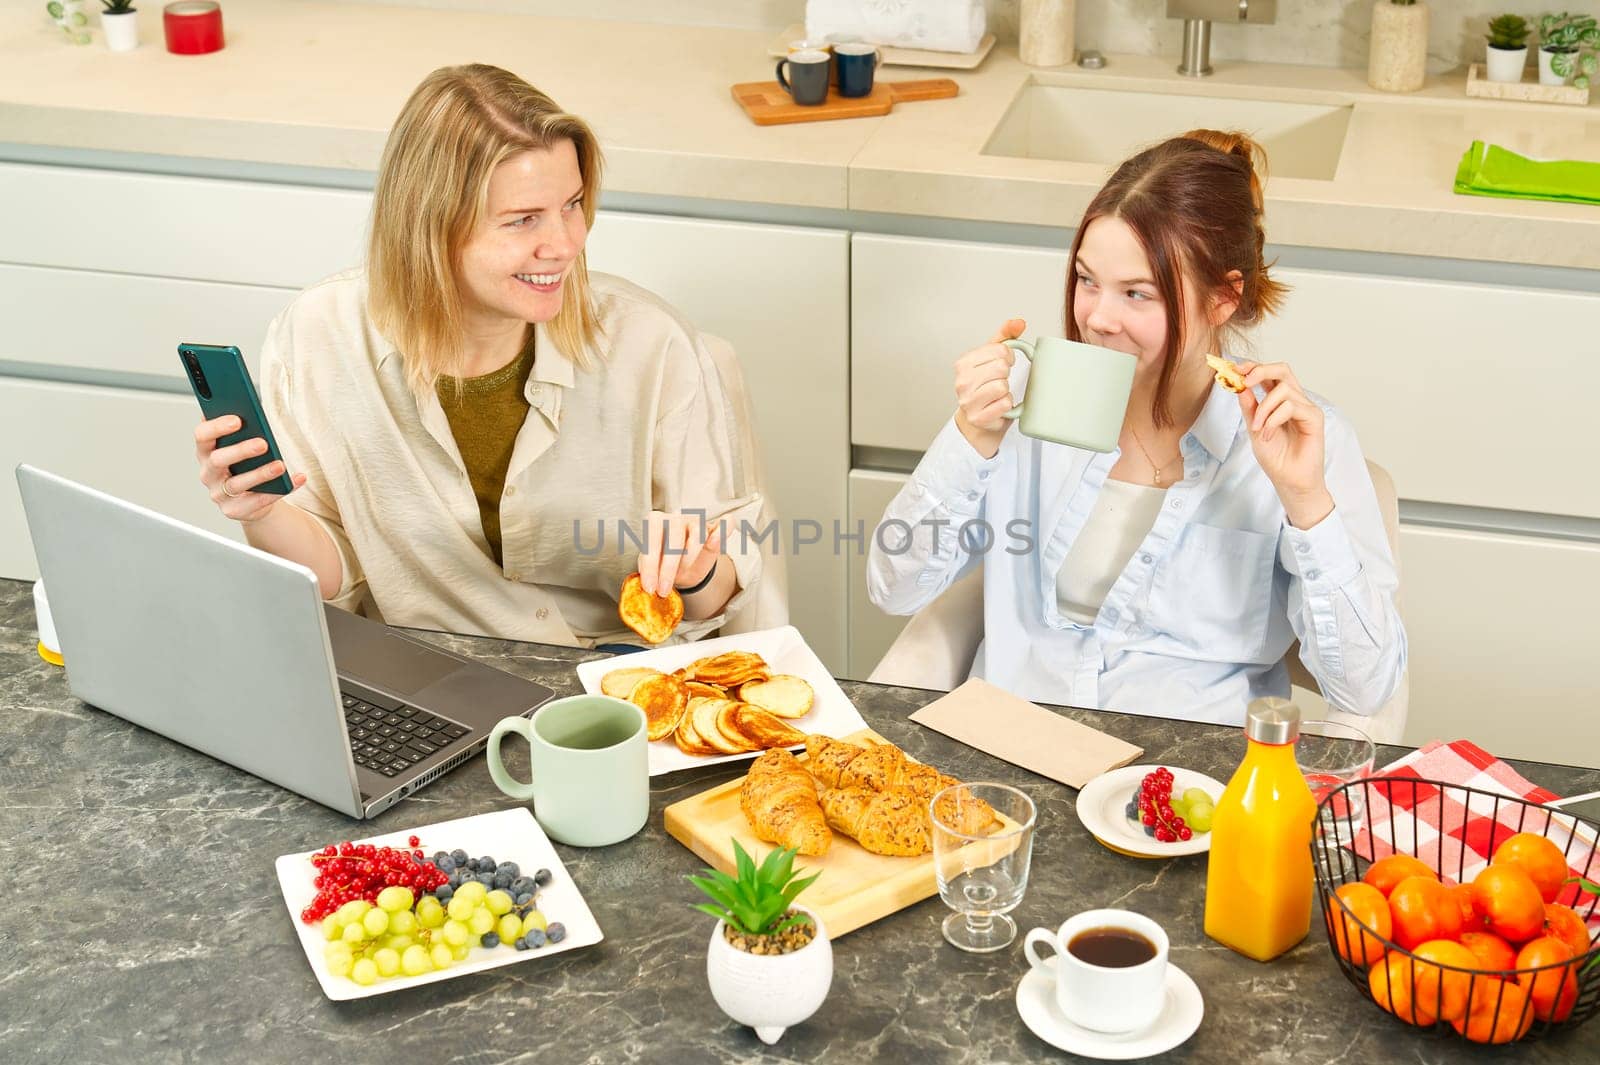 Happy mother and daughter having breakfast in kitchen and using digital devices. Lifestyle by PhotoTime